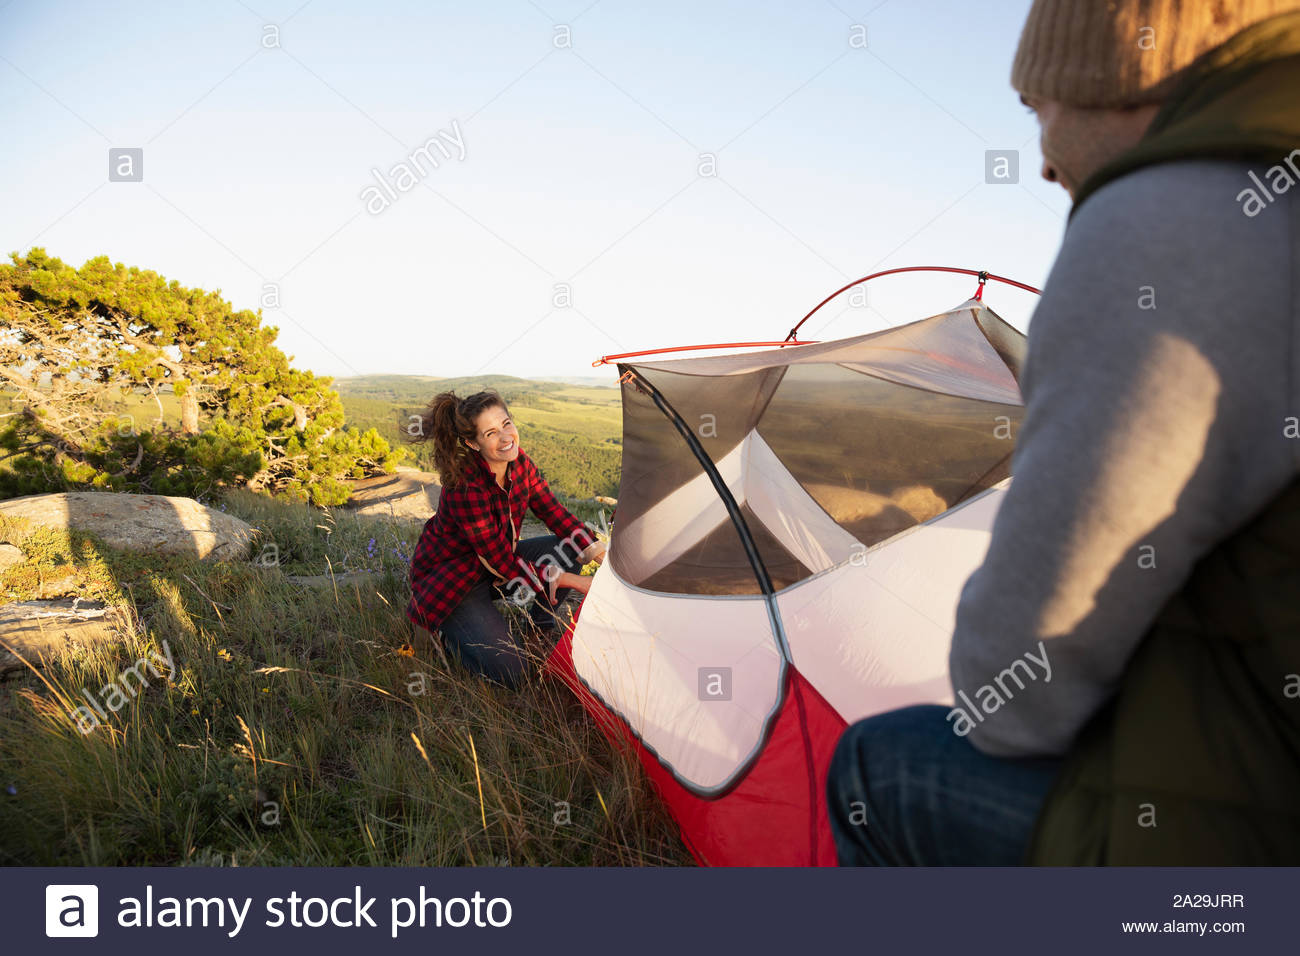 Young couple pitching tent in sunlight on hill Stock Photo